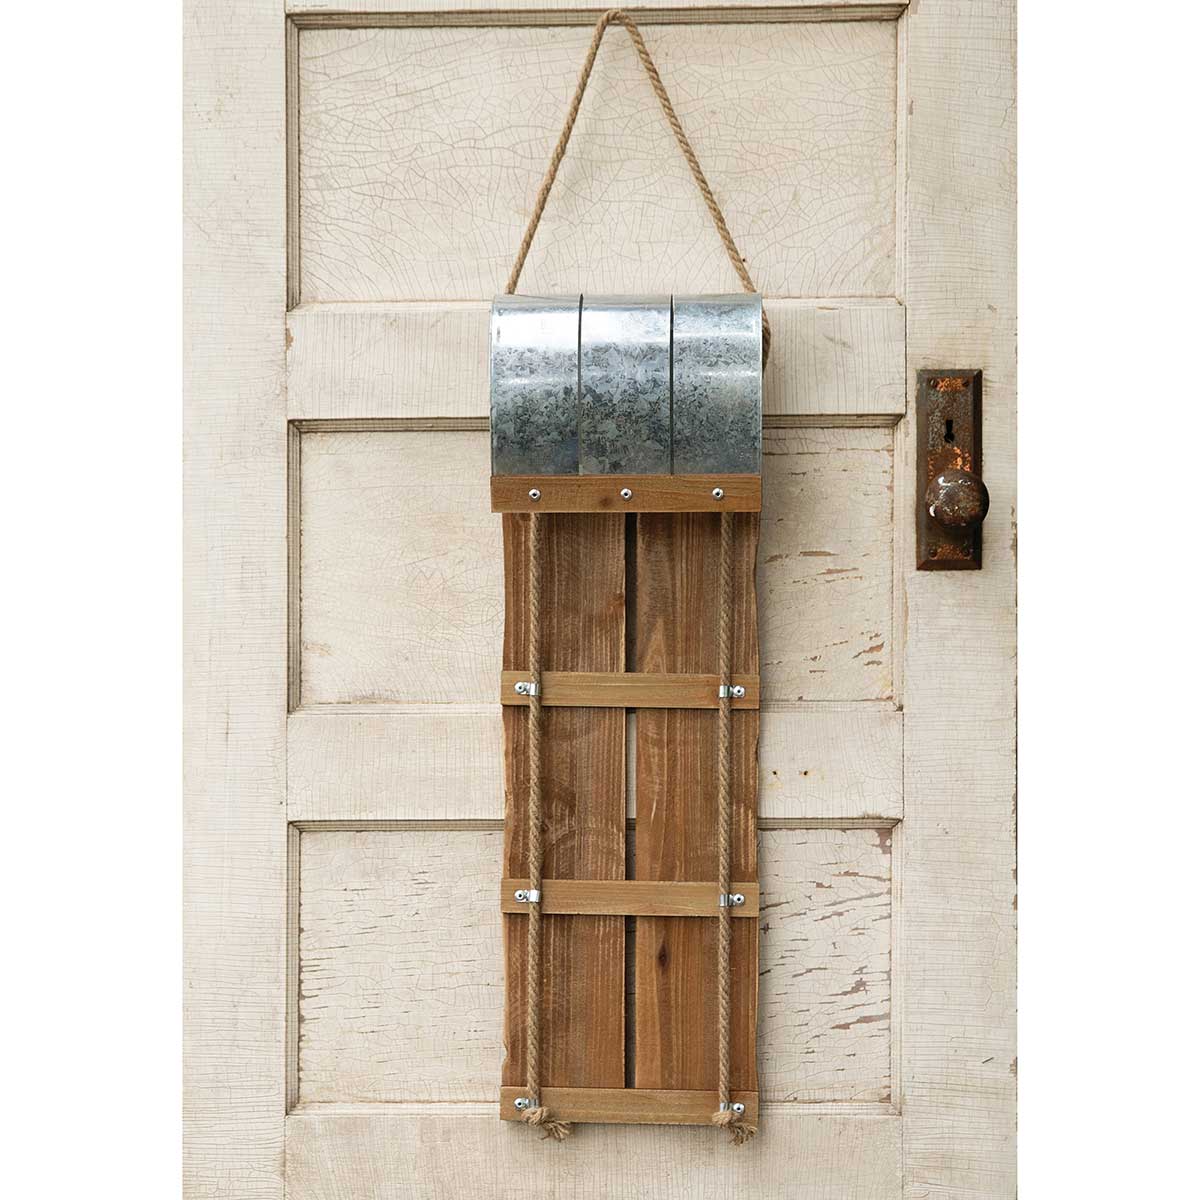 NATURAL WOOD/GALVANIZED METAL SLED WITH ROPE HANGER - Click Image to Close